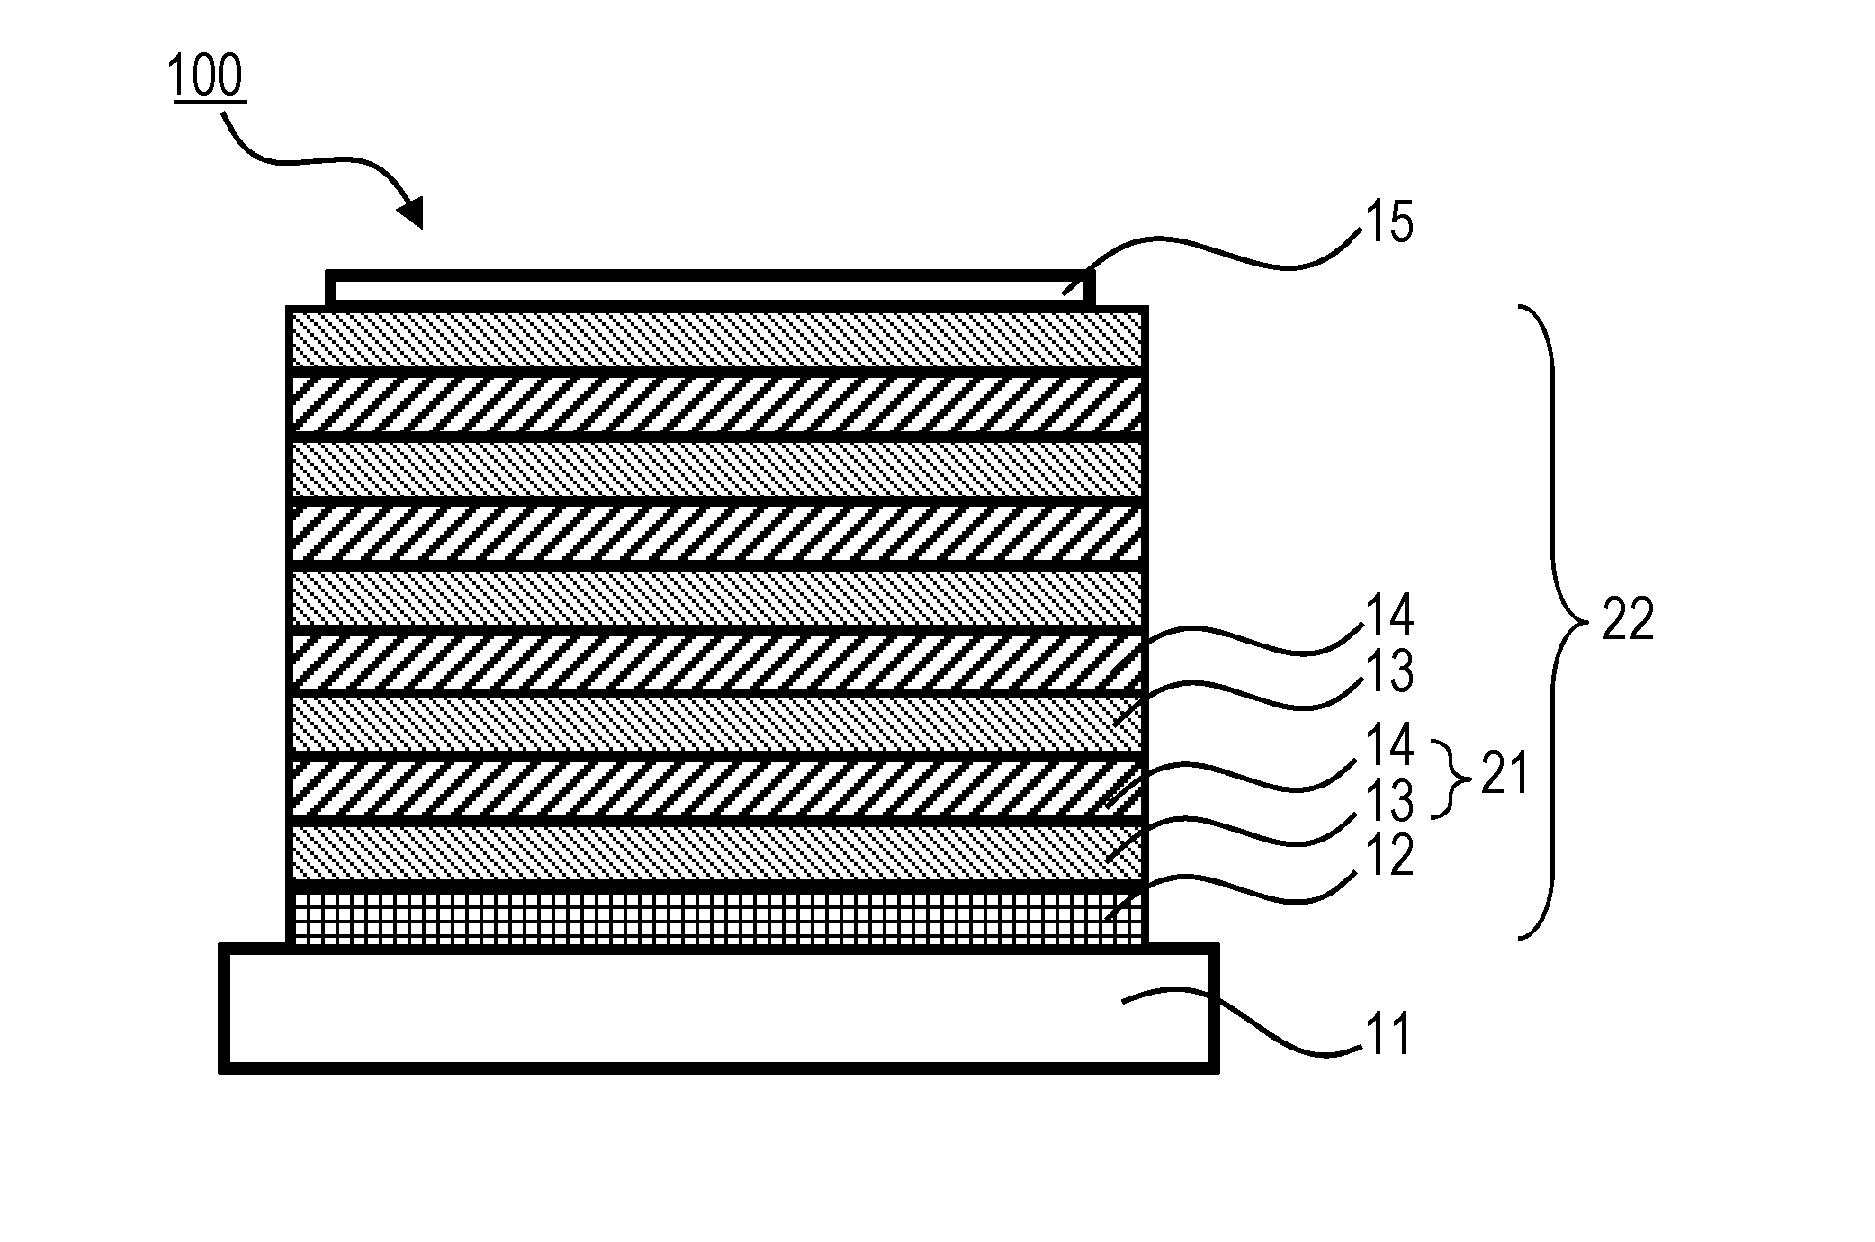 Thin-film dielectric and thin-film capacitor element